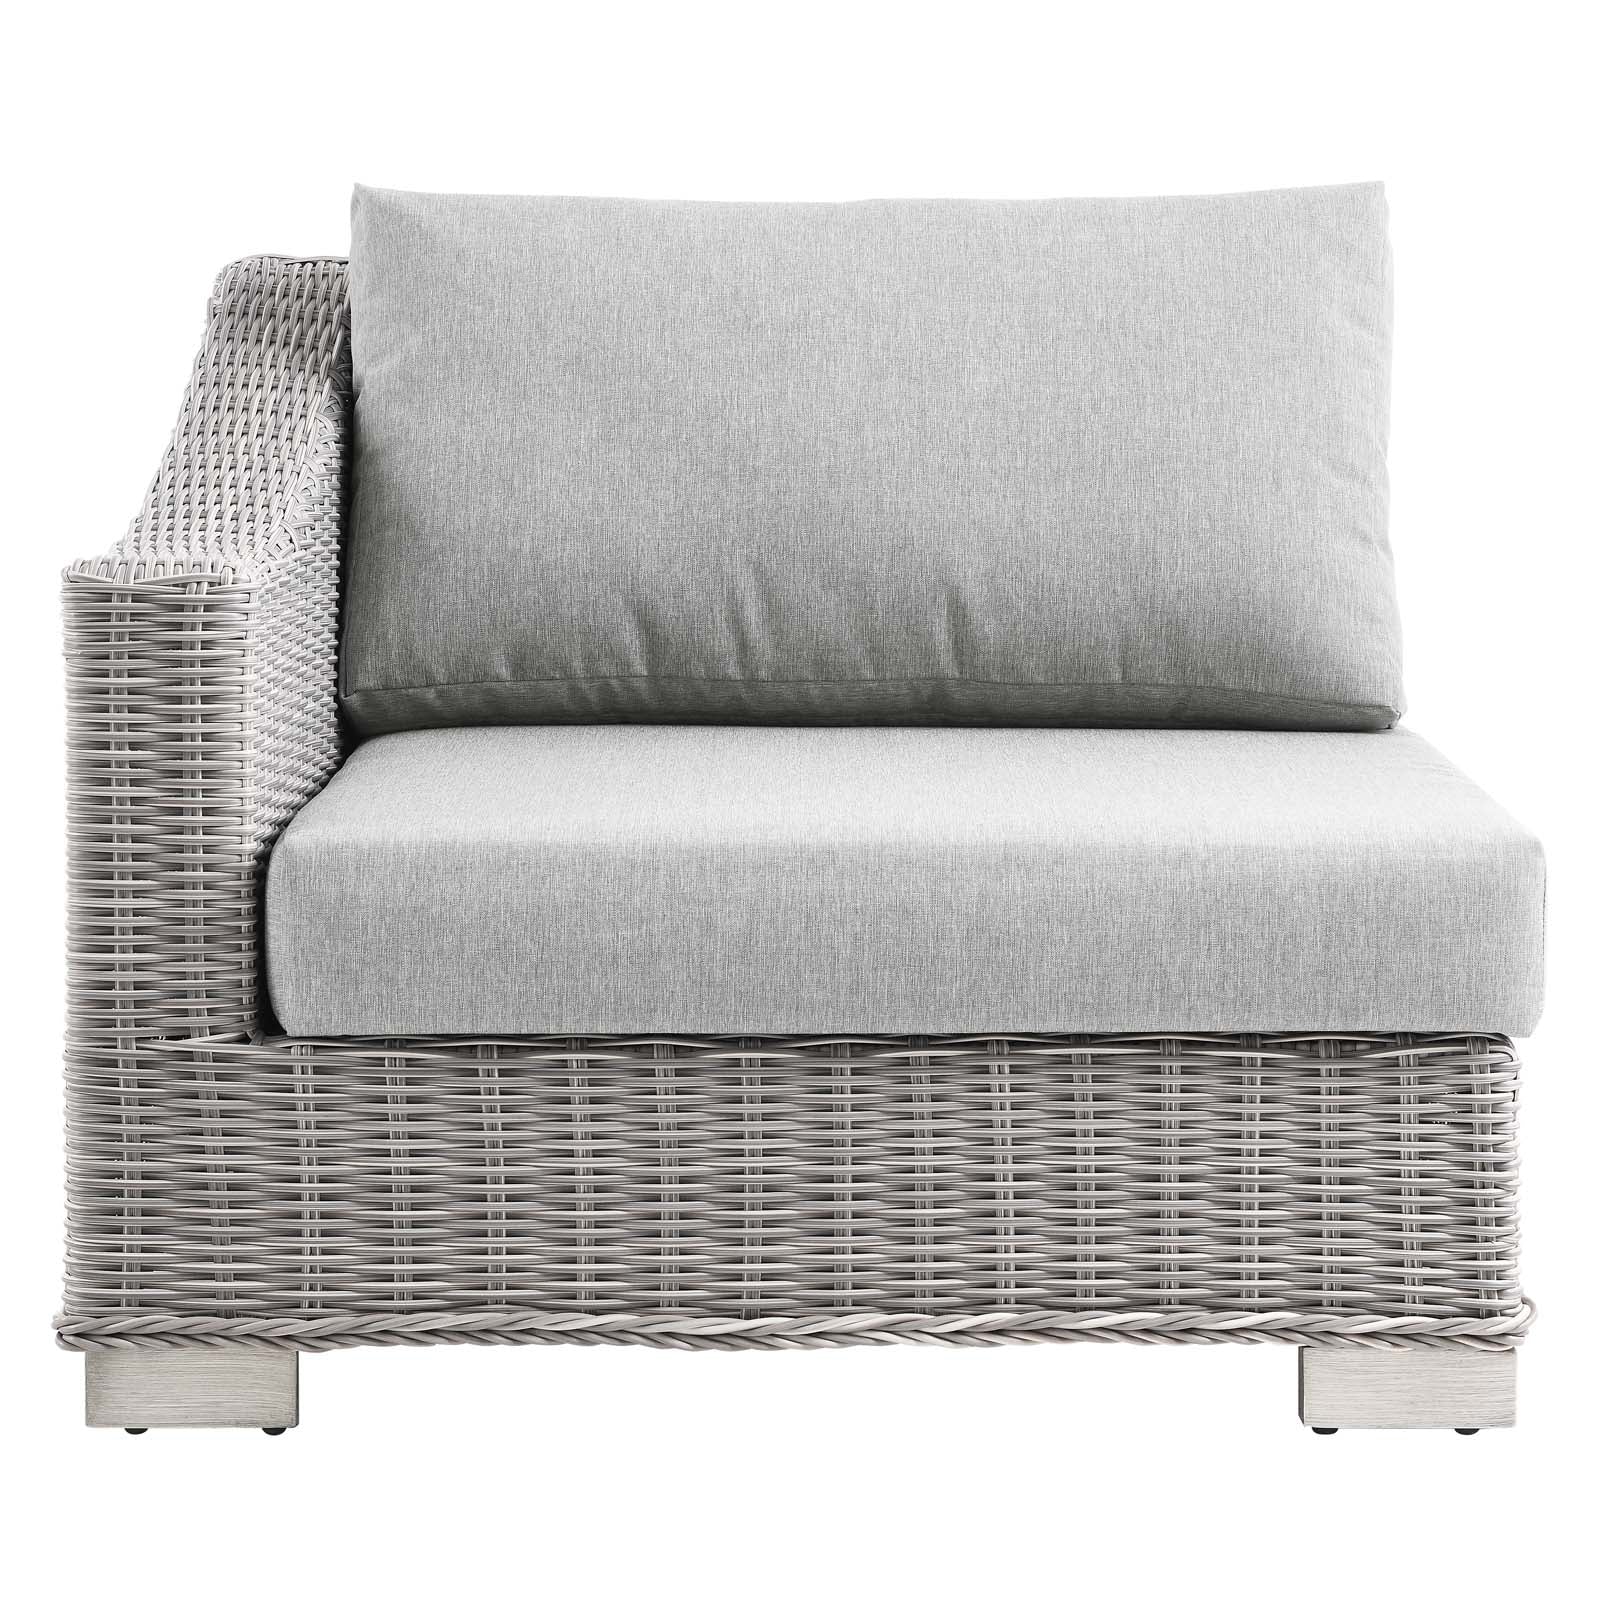 Modway Outdoor Chairs - Conway Outdoor Patio Wicker Rattan Left-Arm Chair Light Gray